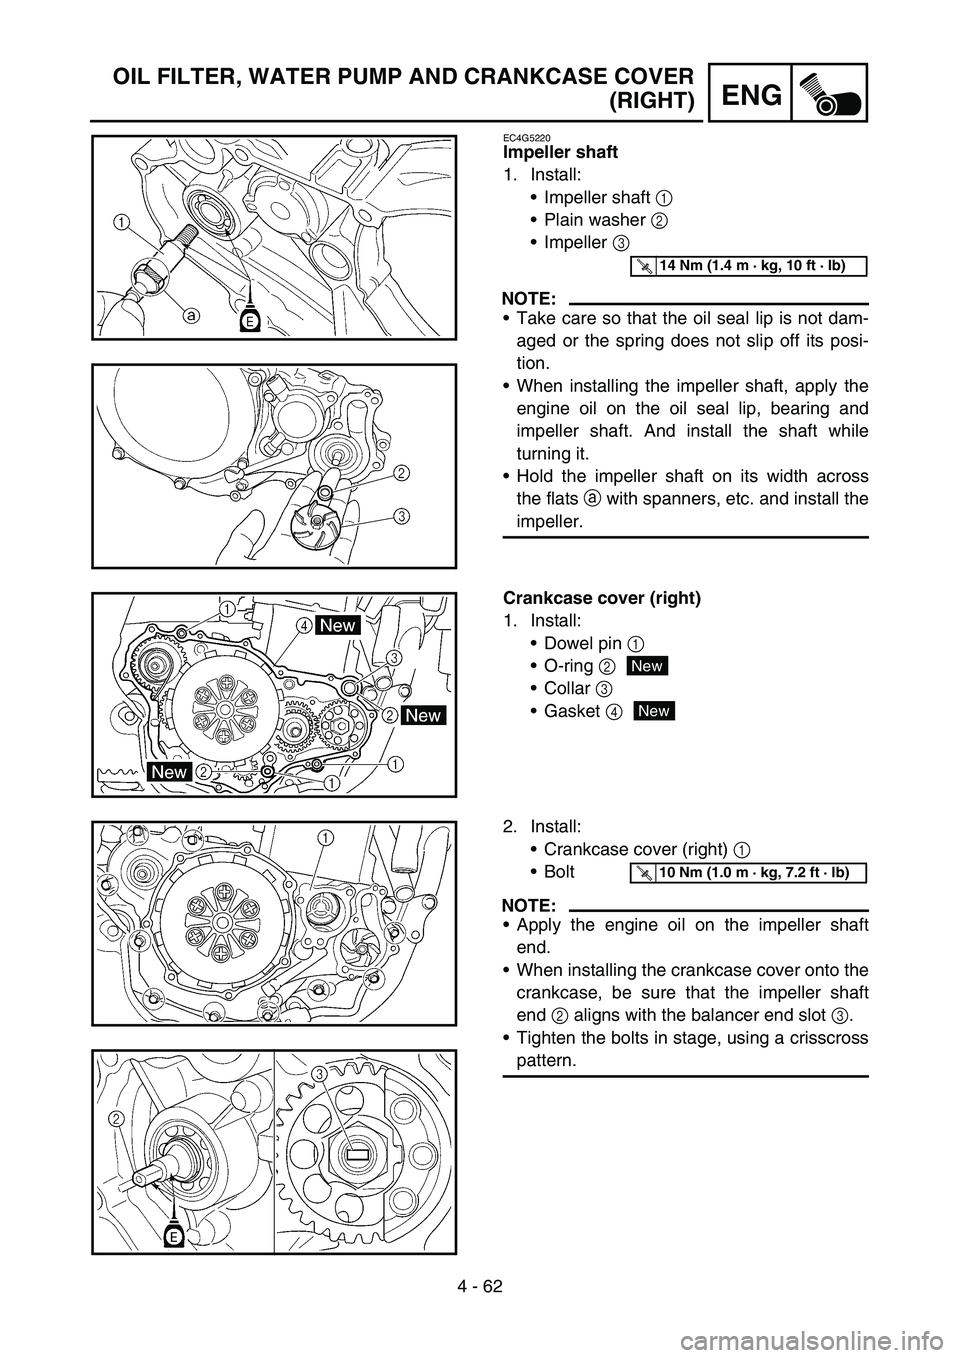 YAMAHA WR 450F 2005  Owners Manual 4 - 62
ENG
OIL FILTER, WATER PUMP AND CRANKCASE COVER
(RIGHT)
EC4G5220
Impeller shaft
1. Install:
Impeller shaft 1 
Plain washer 2 
Impeller 3 
NOTE:
Take care so that the oil seal lip is not dam-